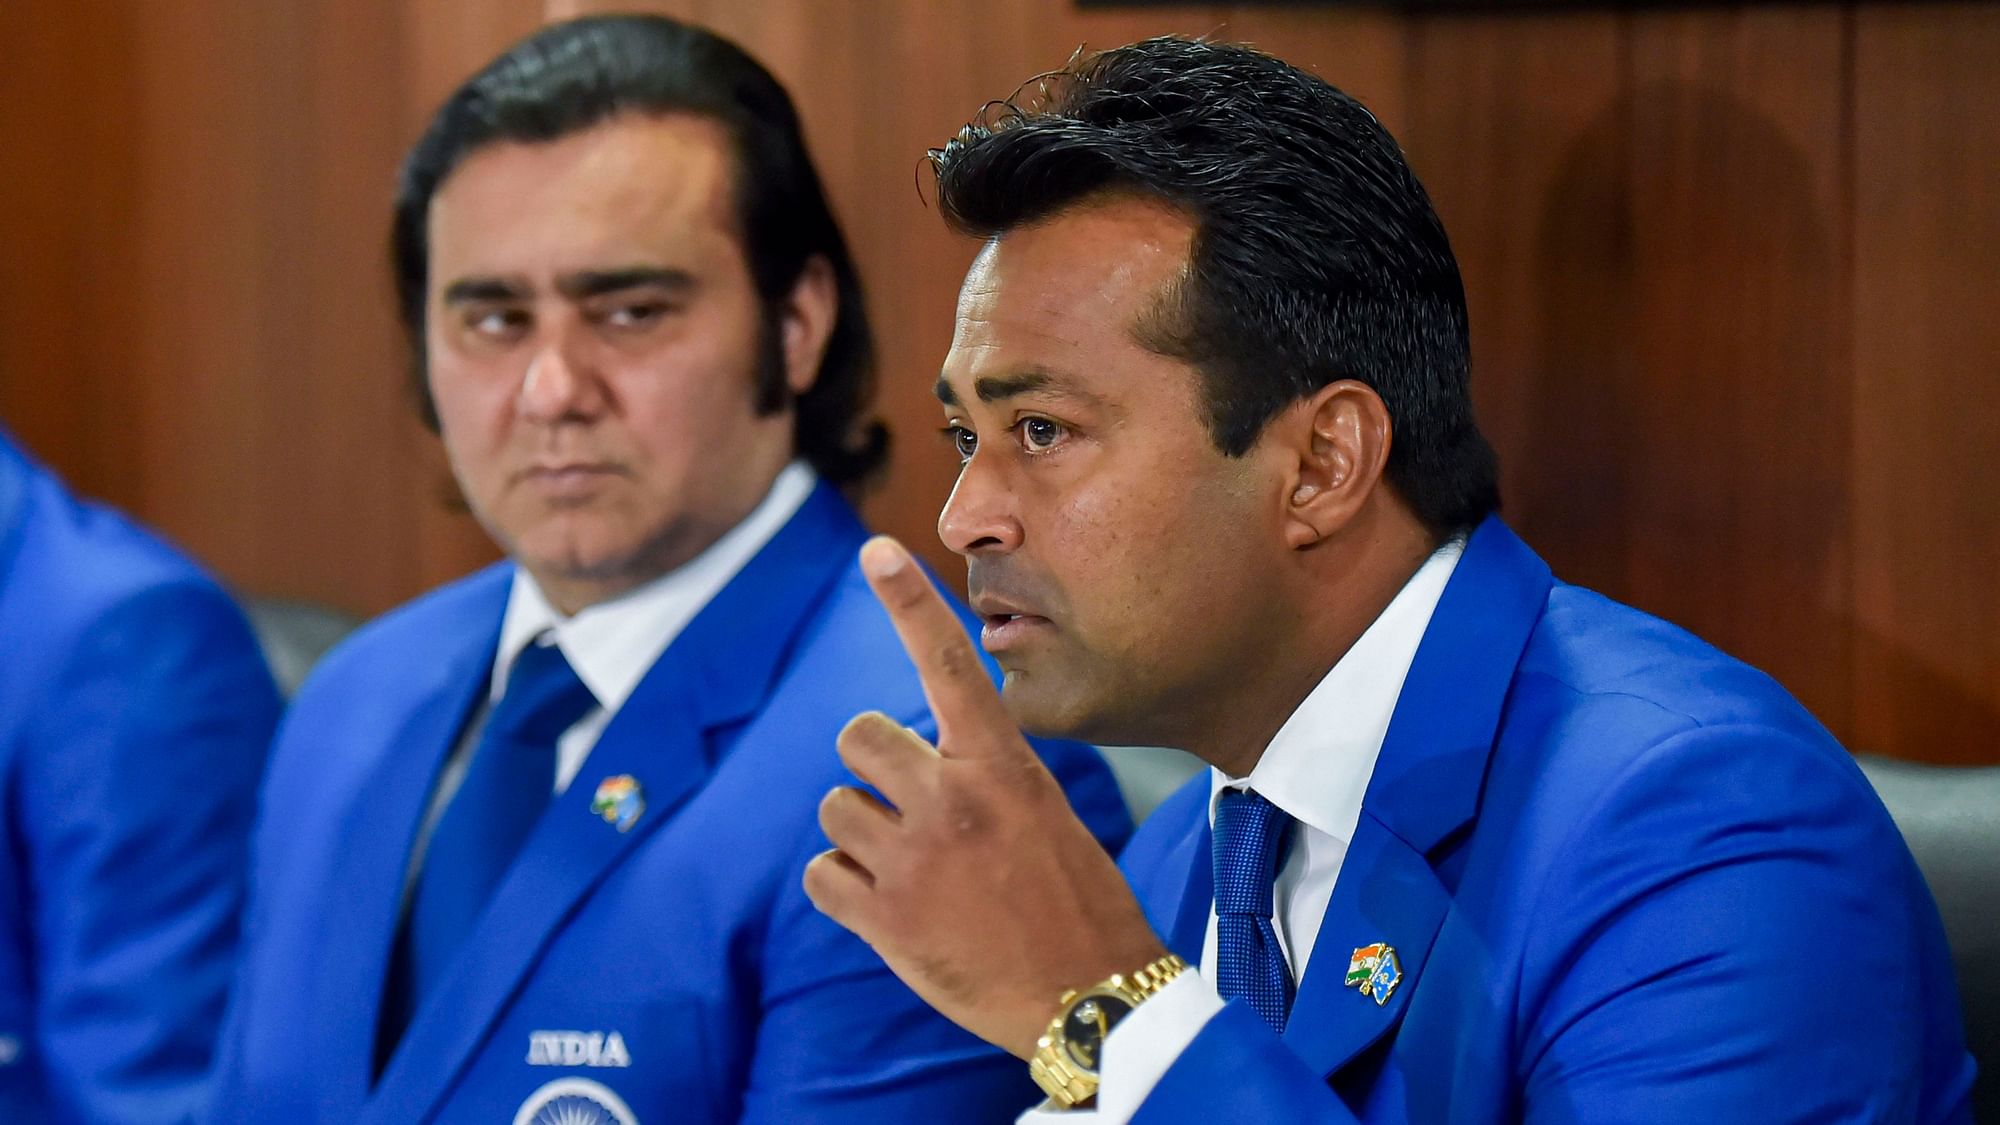 Veteran Indian tennis player Leander Paes hinted at a possible retirement.